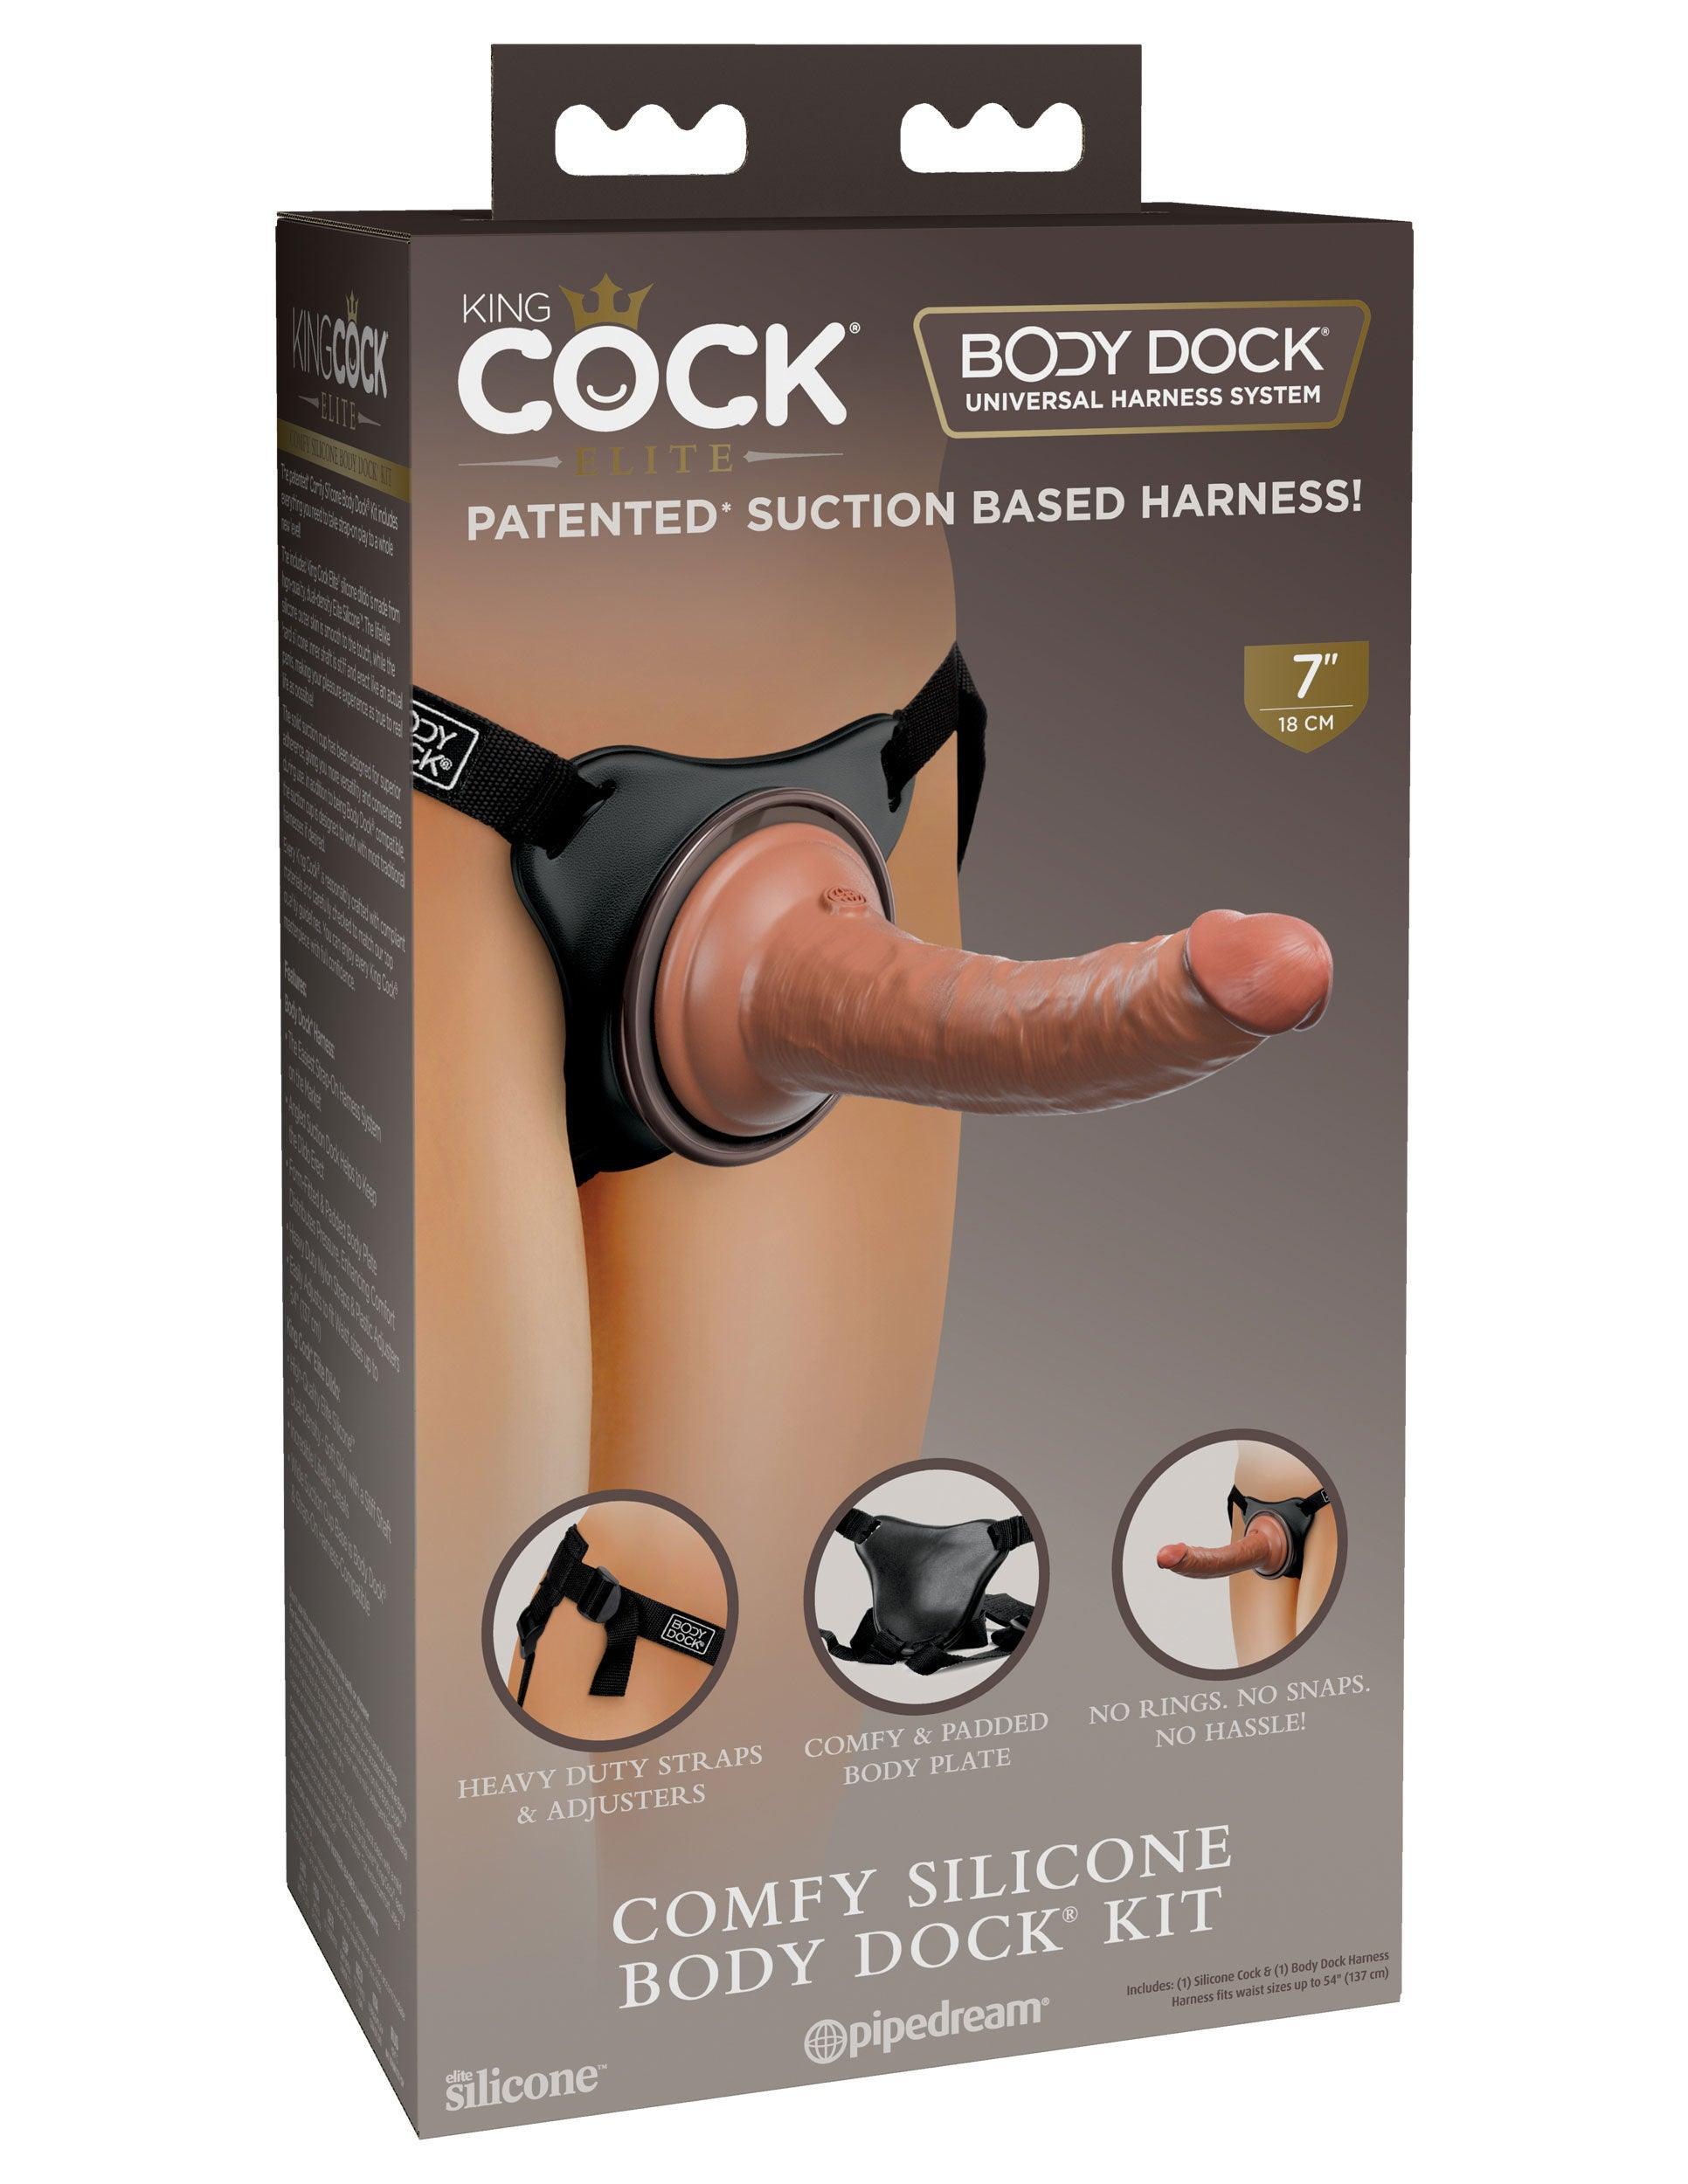 King Cock Elite Comfy Silicone Body Dock Kit - Harness and 7 Inch Dildo - Tan - My Sex Toy Hub